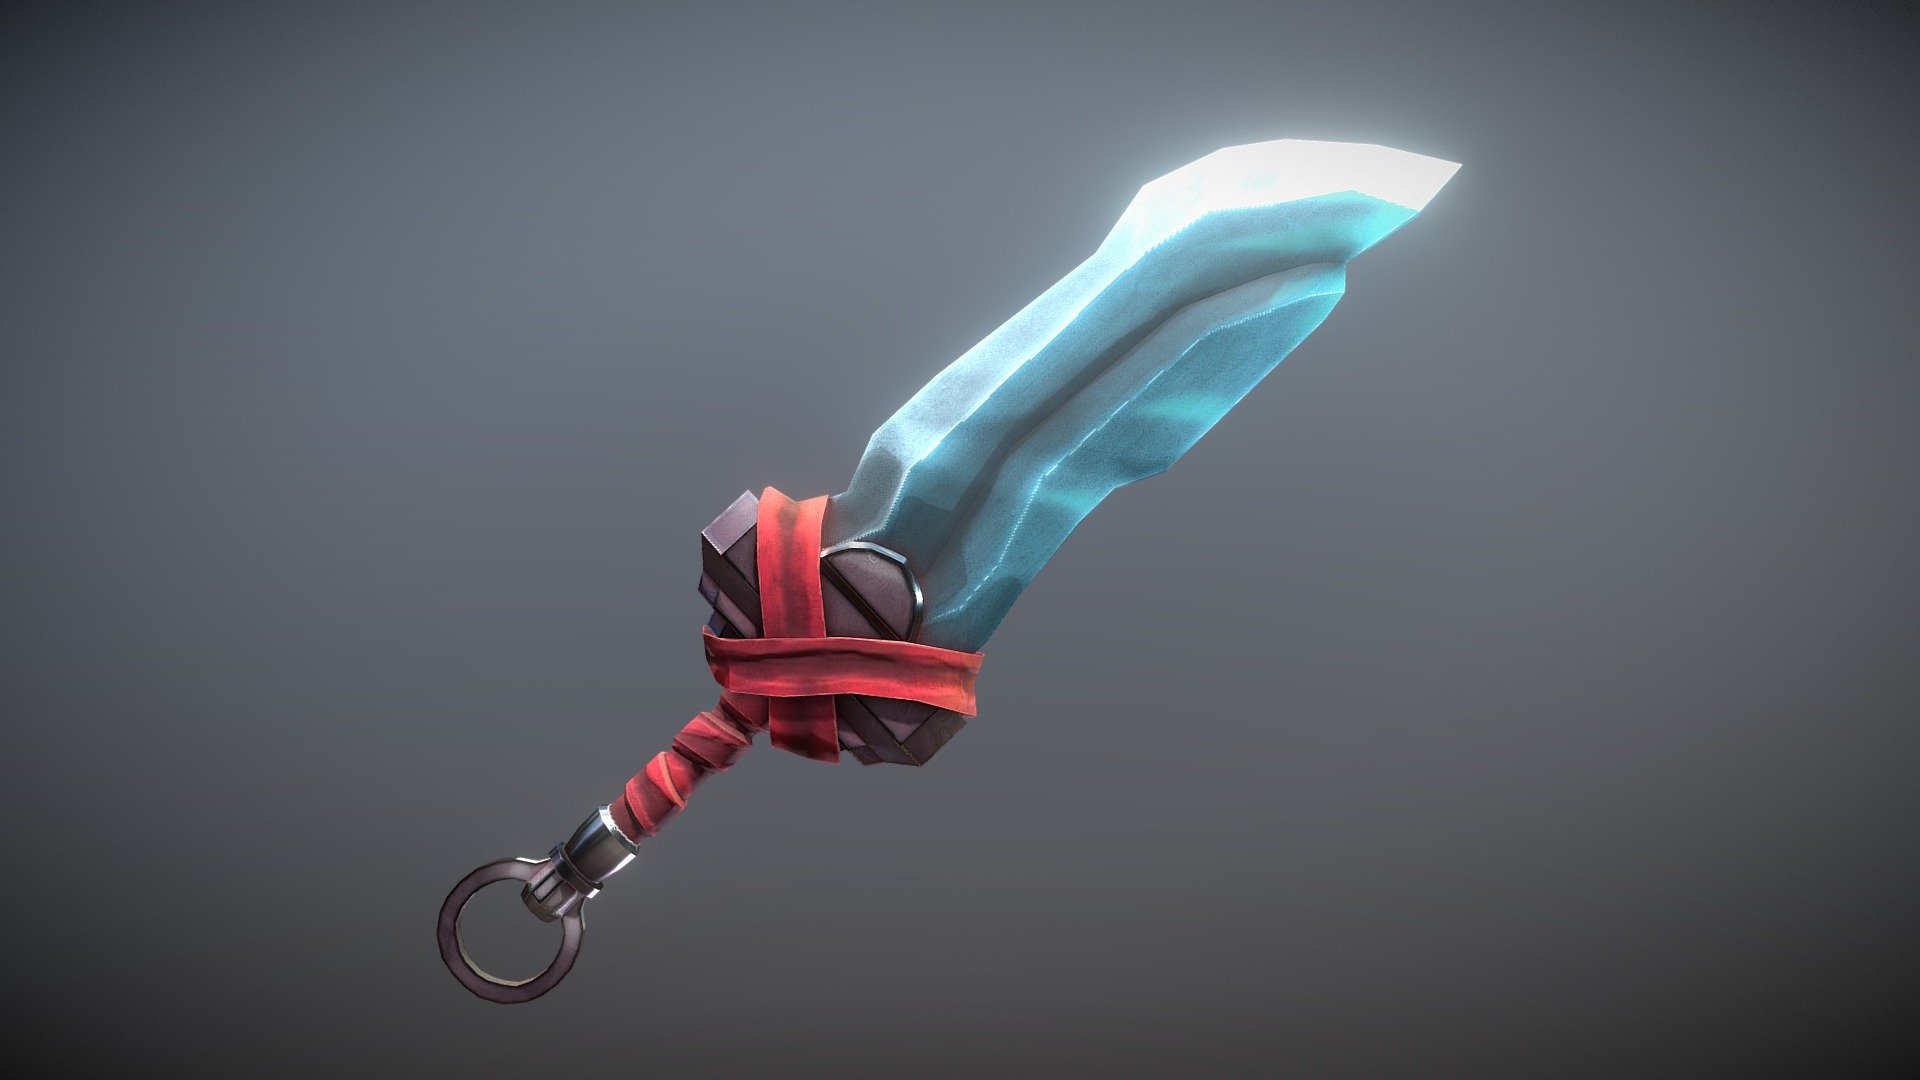 A magic crystal sword, forged by the blacksmith Siegkell. The legendary blacksmith Siegkell disappeared one day, fearing his life before the greedy king. However, his blacksmith can still be found, but only by people with a good heart.

Stylized sword prop, going to be used in my next environment, which our protagonist will find. A continuation of my final year project 3d model